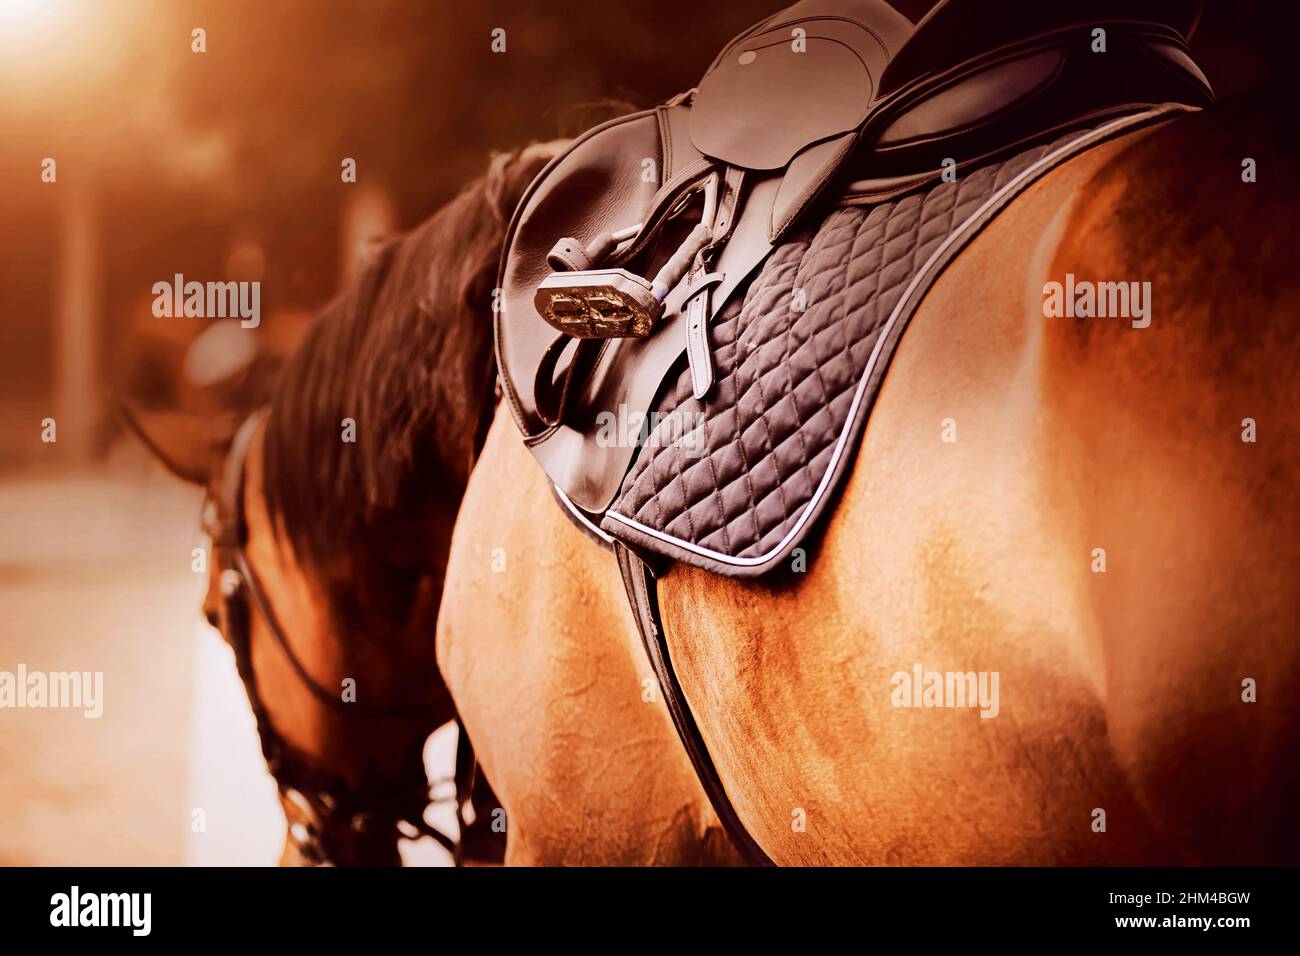 The bay horse is wearing a leather saddle, a dark saddlecloth and a stirrup on a sunny day. Equestrian sports and ammunition. Dressage competitions. Stock Photo